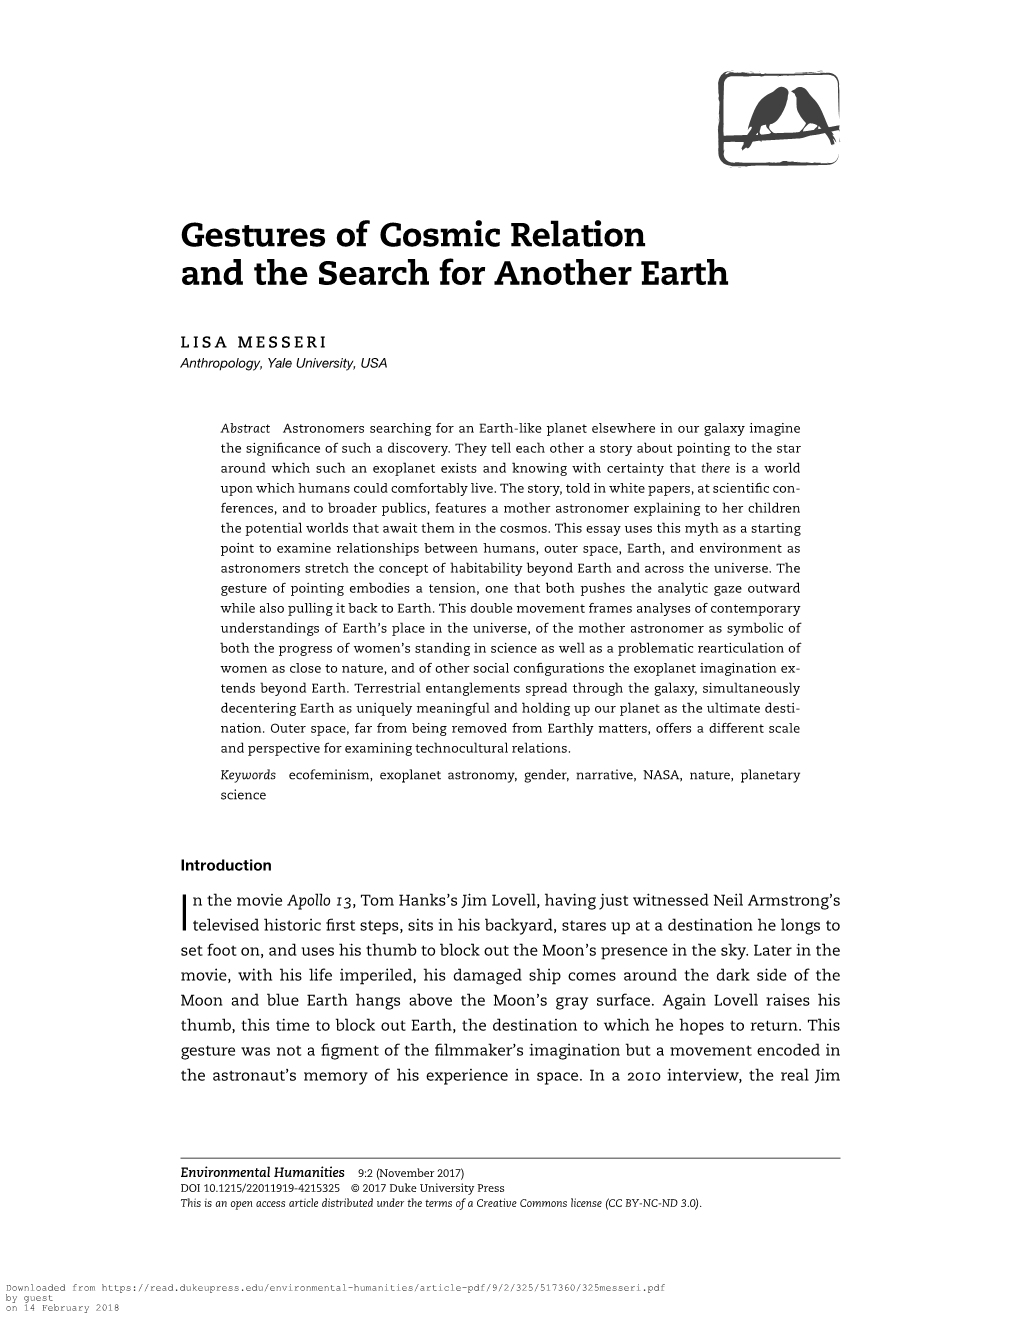 Gestures of Cosmic Relation and the Search for Another Earth